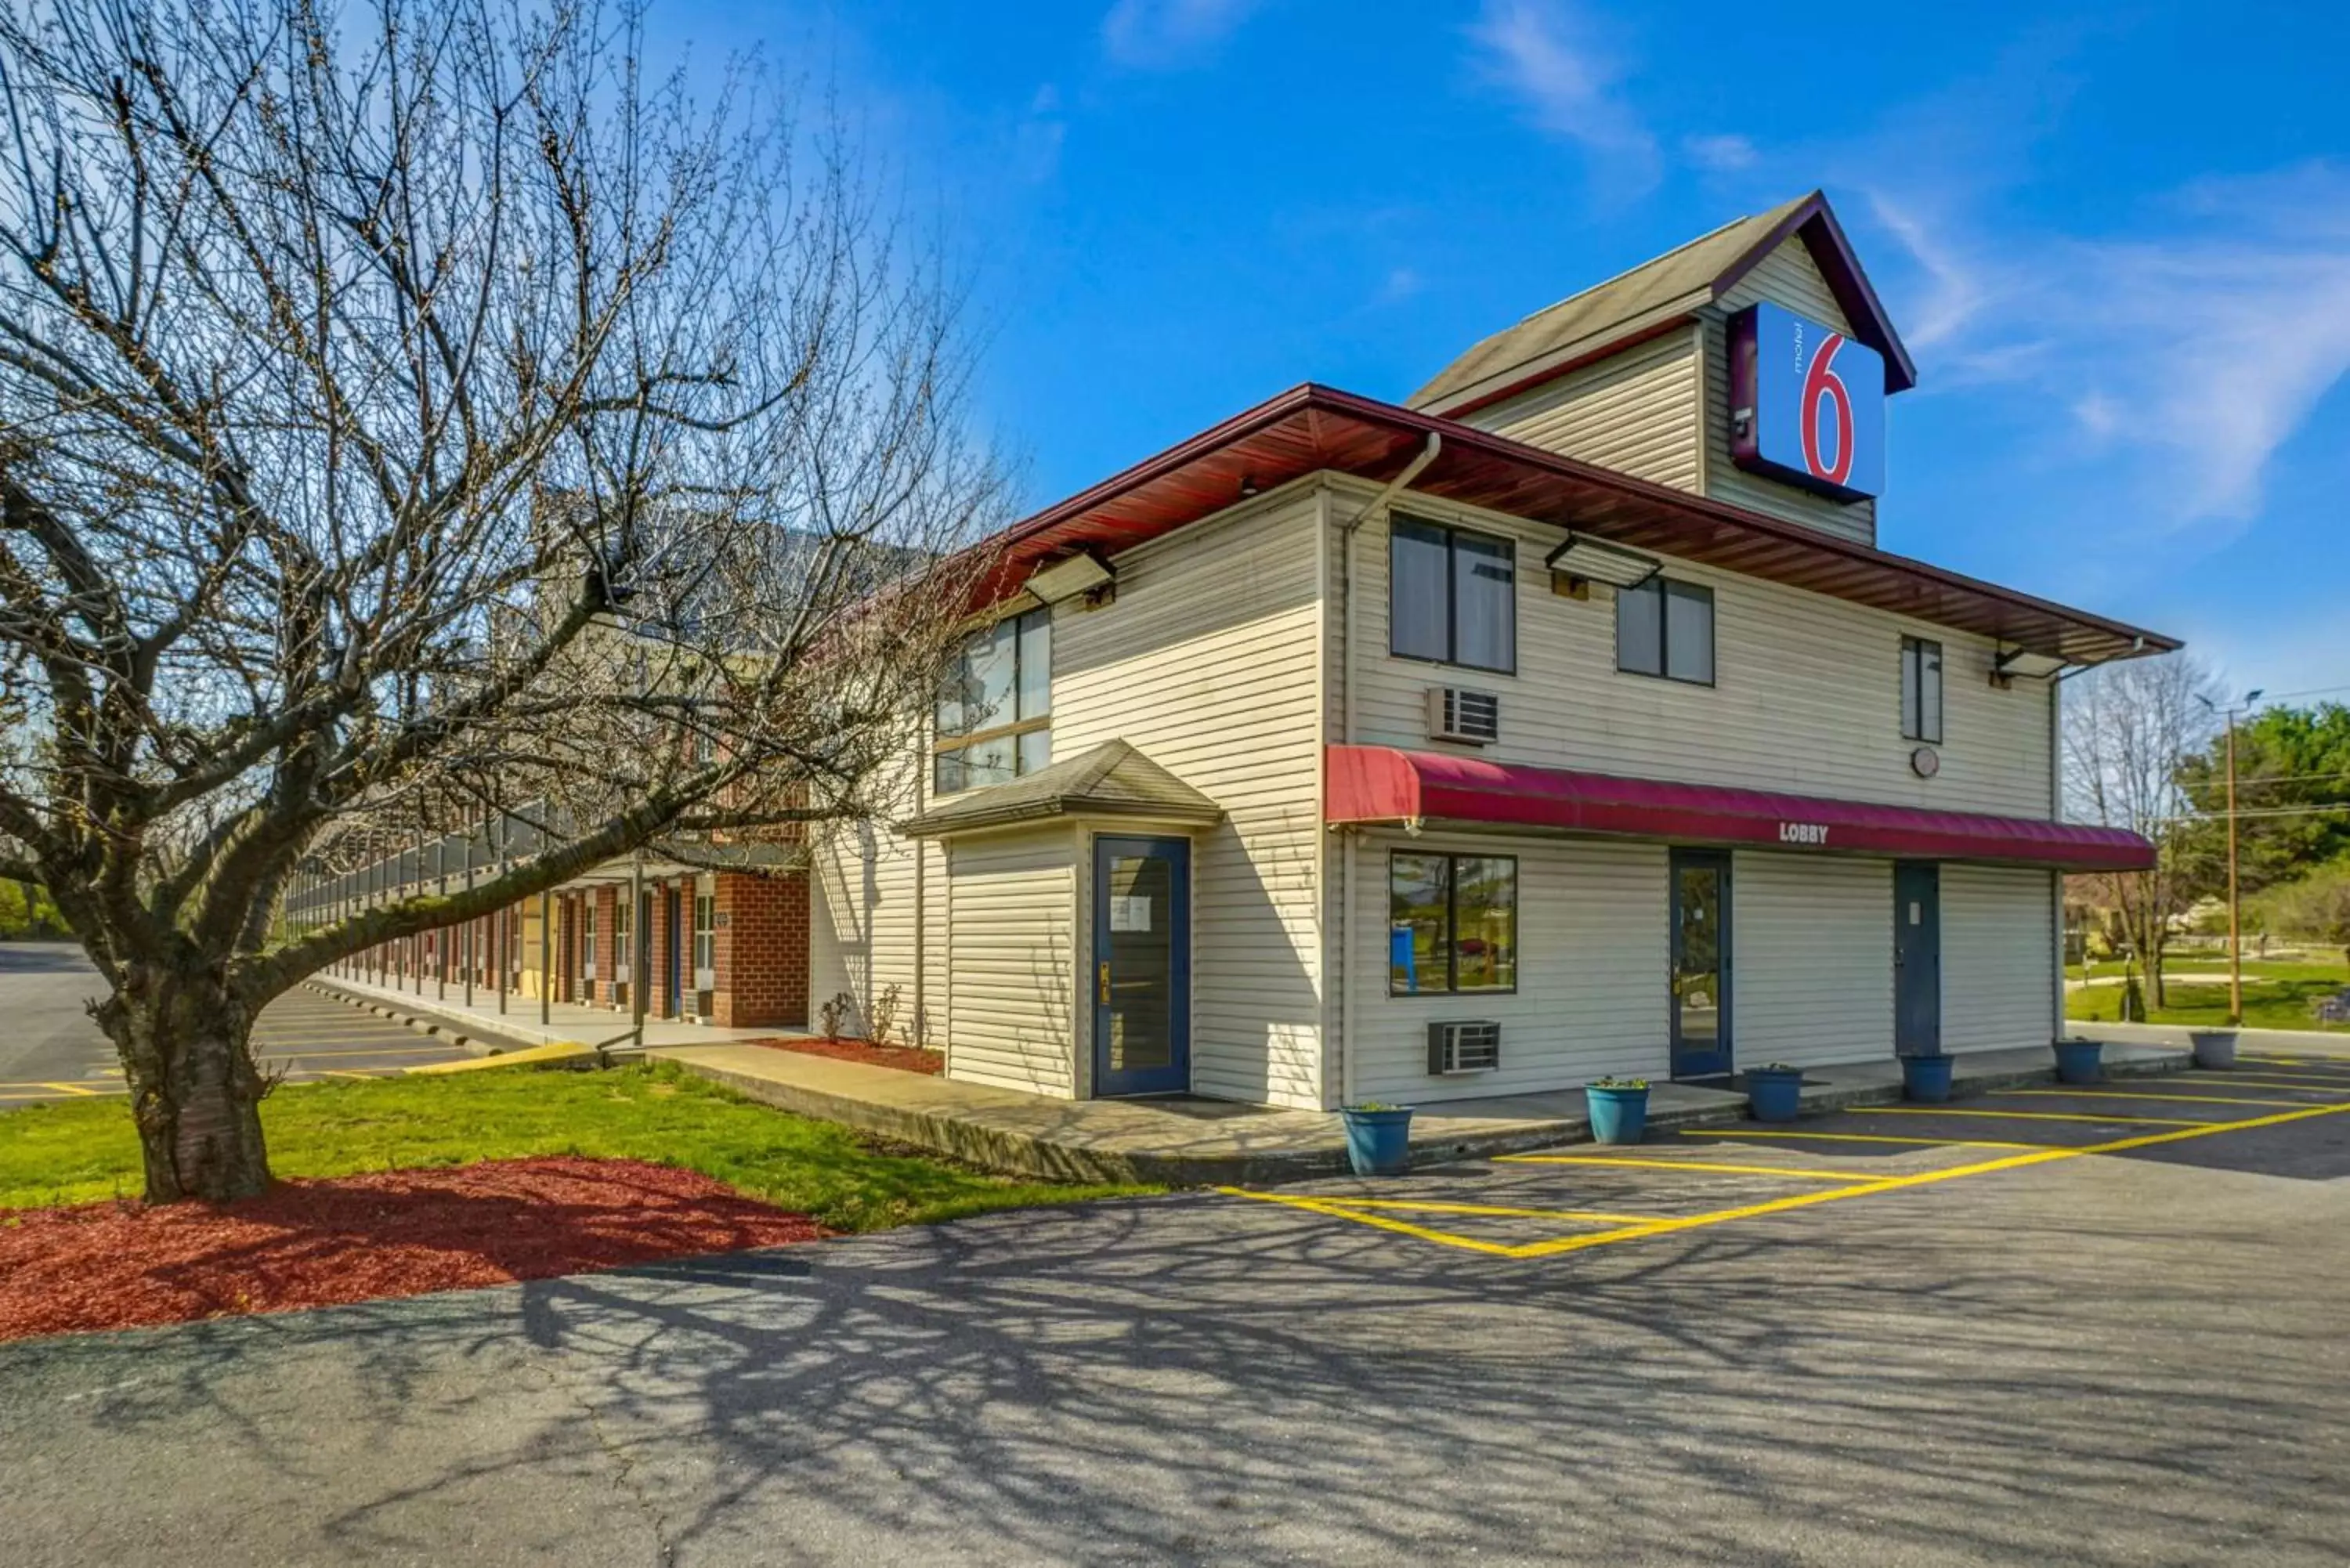 Property building in Motel 6 Carlisle, PA - Cumberland Valley